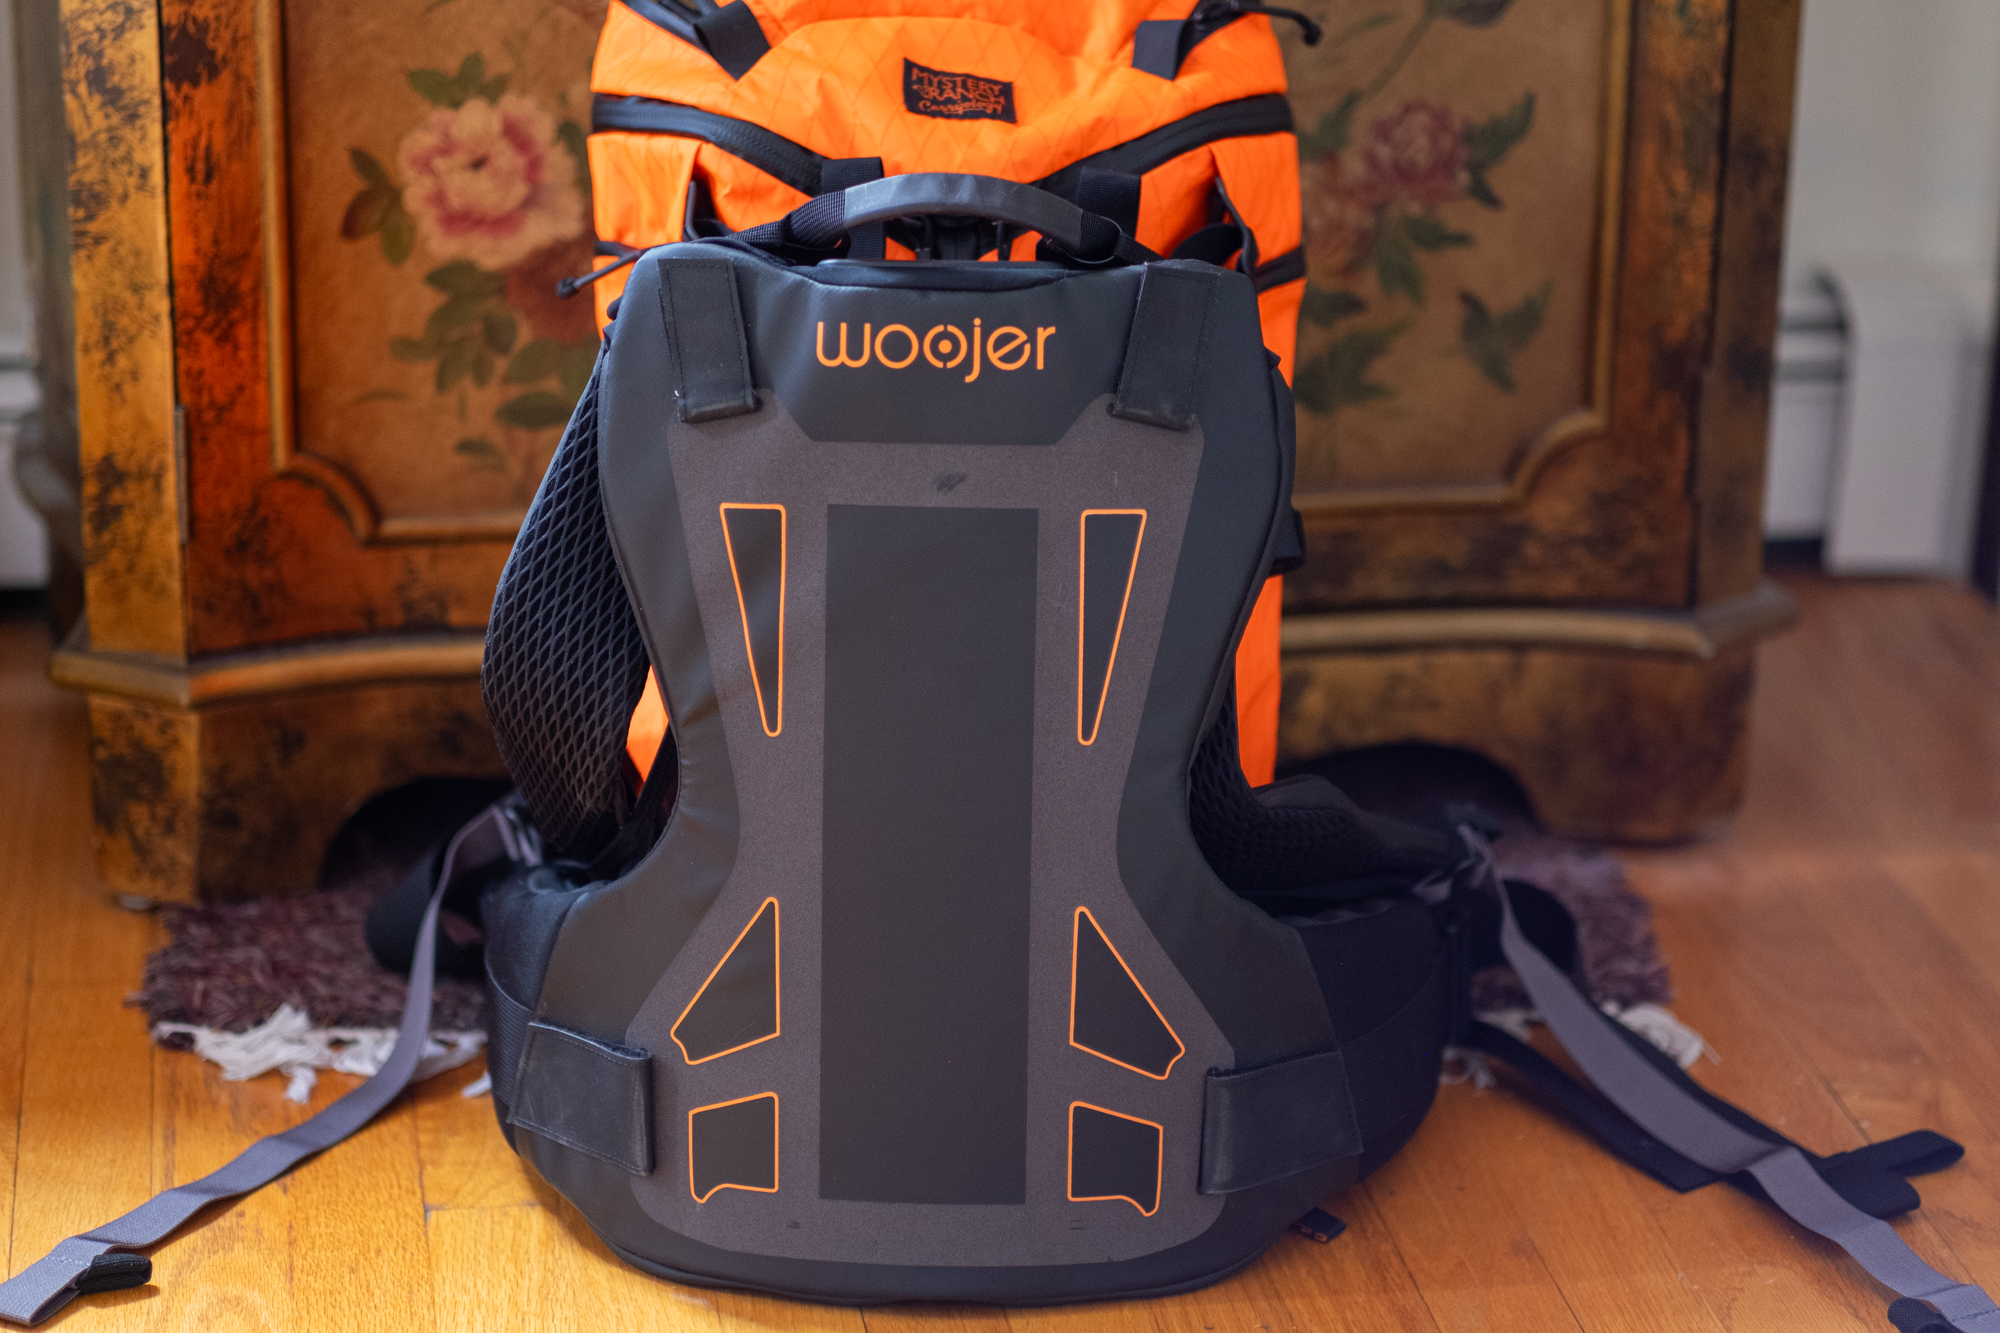 Woojer Vest Pro Review - The Sub-Subwoofer Experience